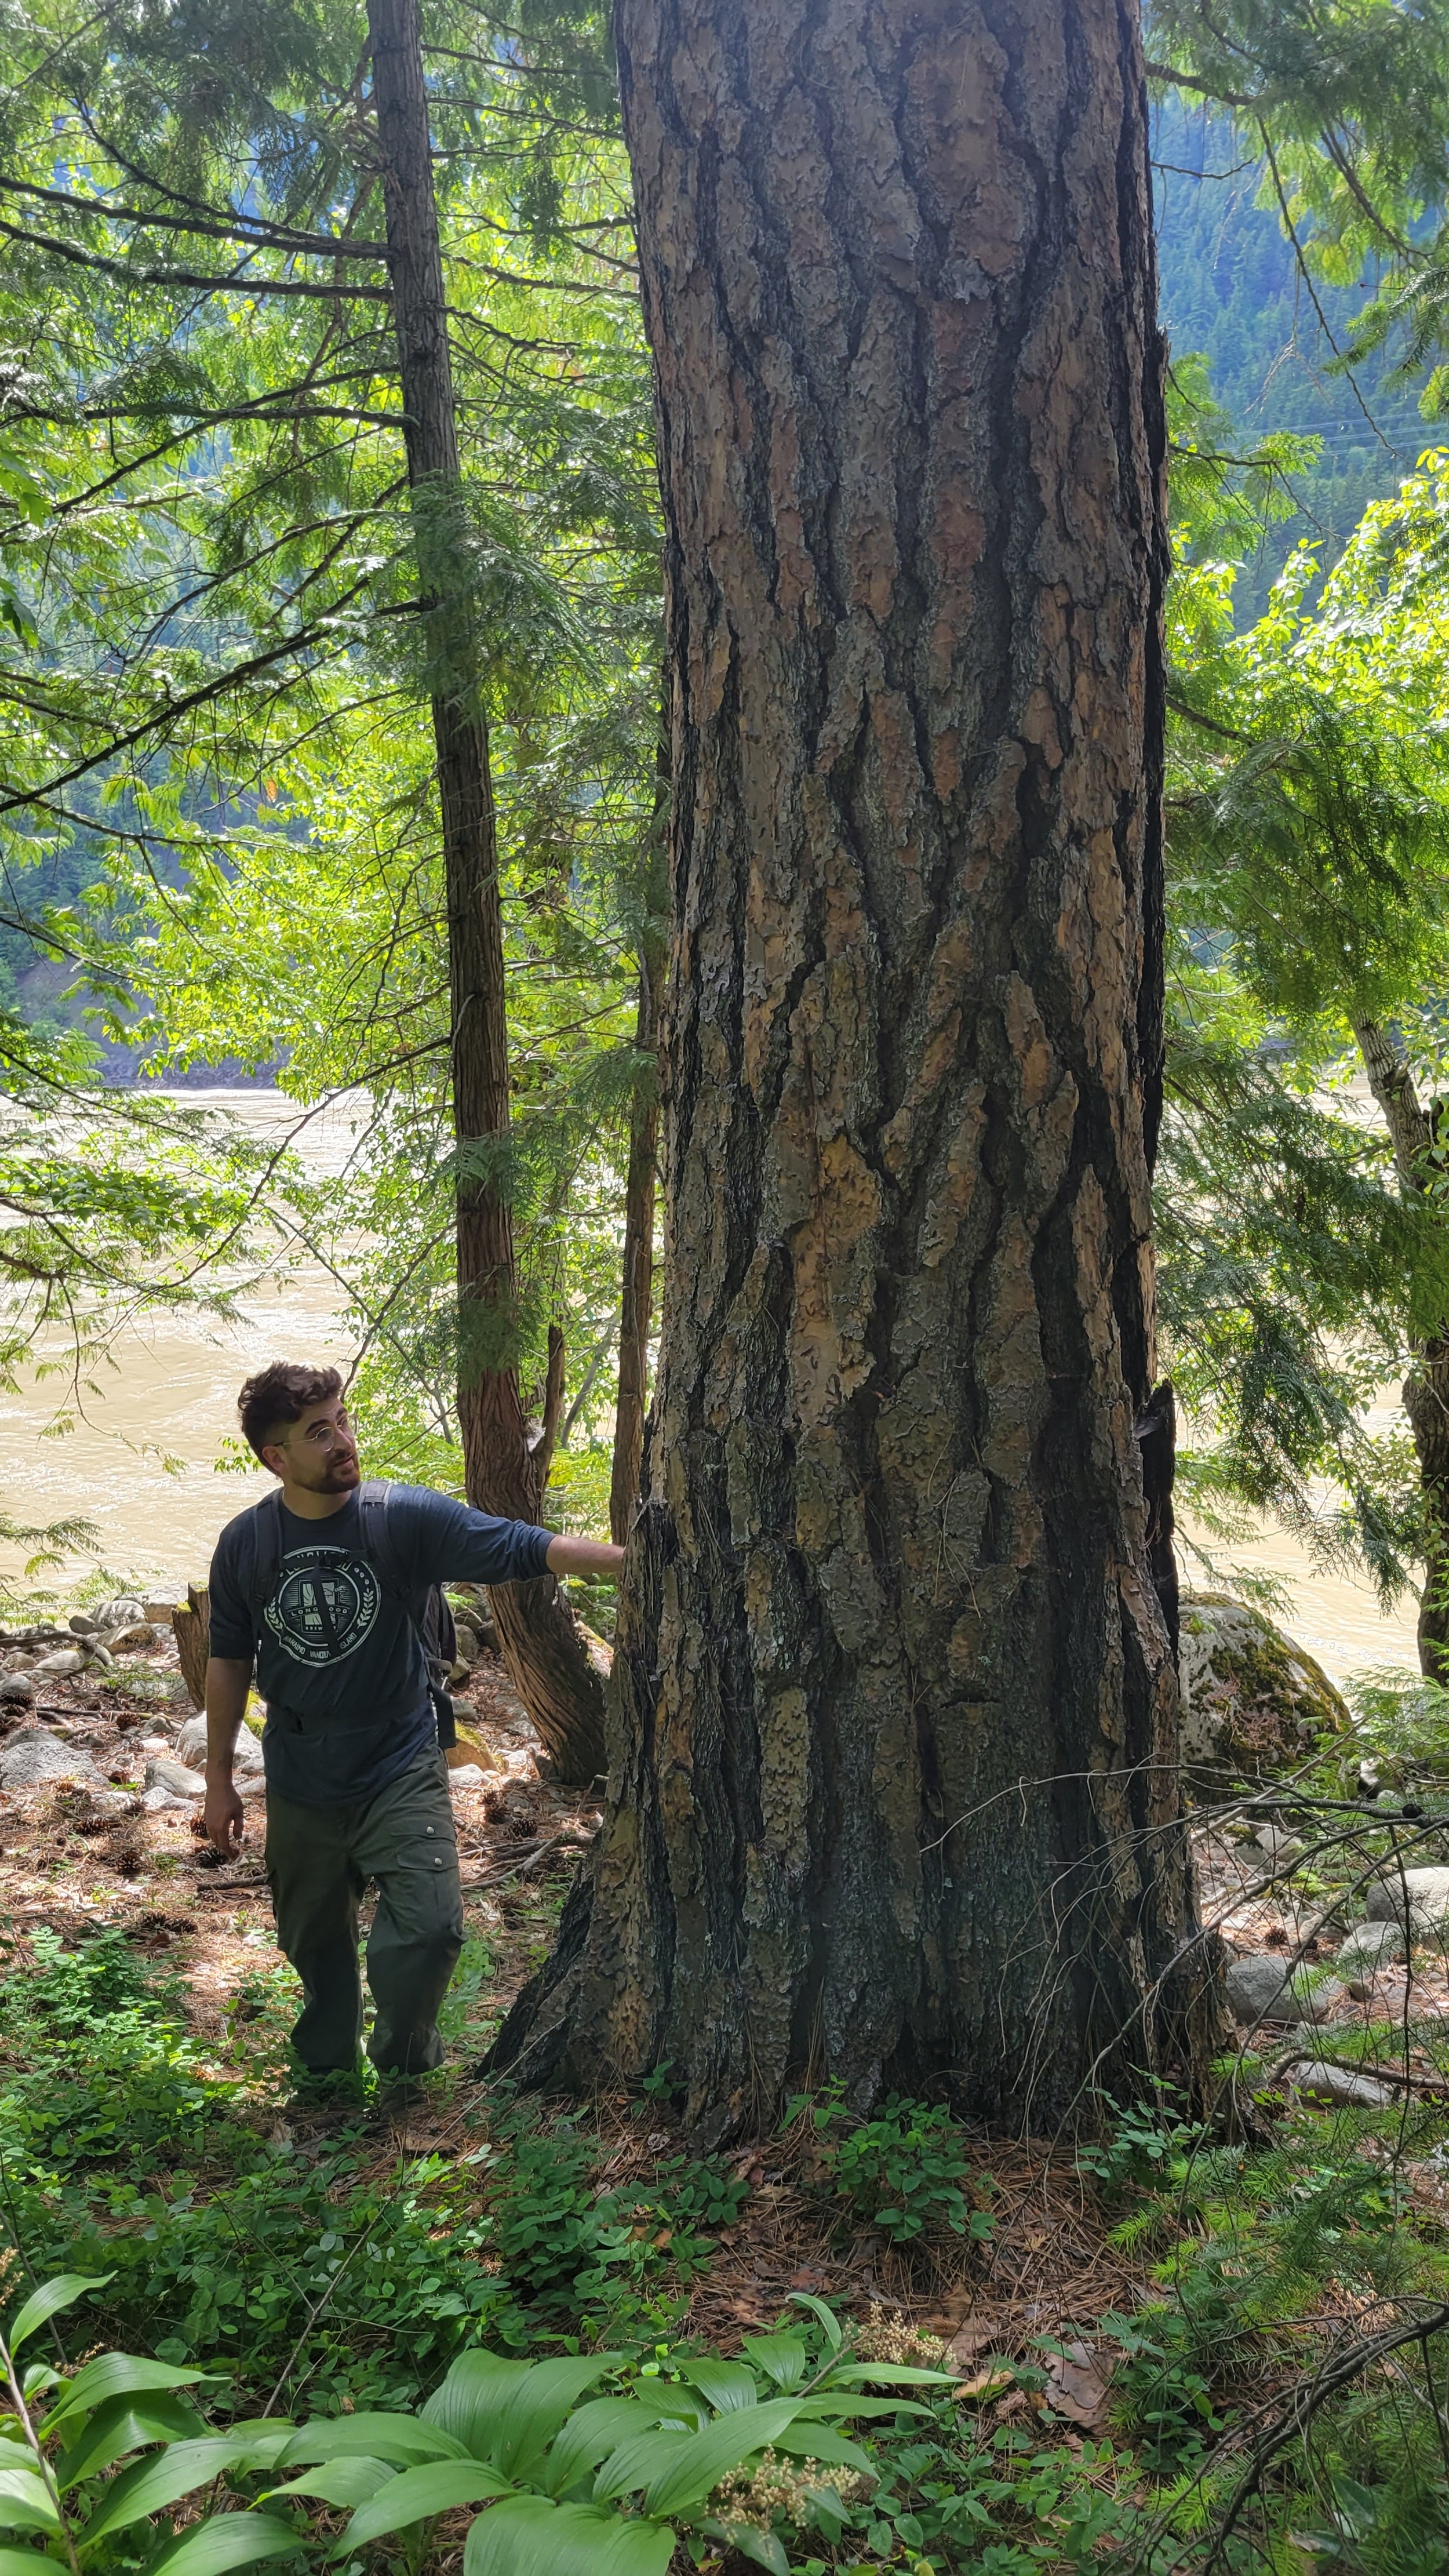  Sean O'Rourke, Lands Manager for the Kanaka Bar Indian Band, stands by an old-growth Ponderosa pine on the Old Man Jack property, a privately-owned old-growth forest newly acquired by the Nature-Based Solutions Foundation for conservation purposes f